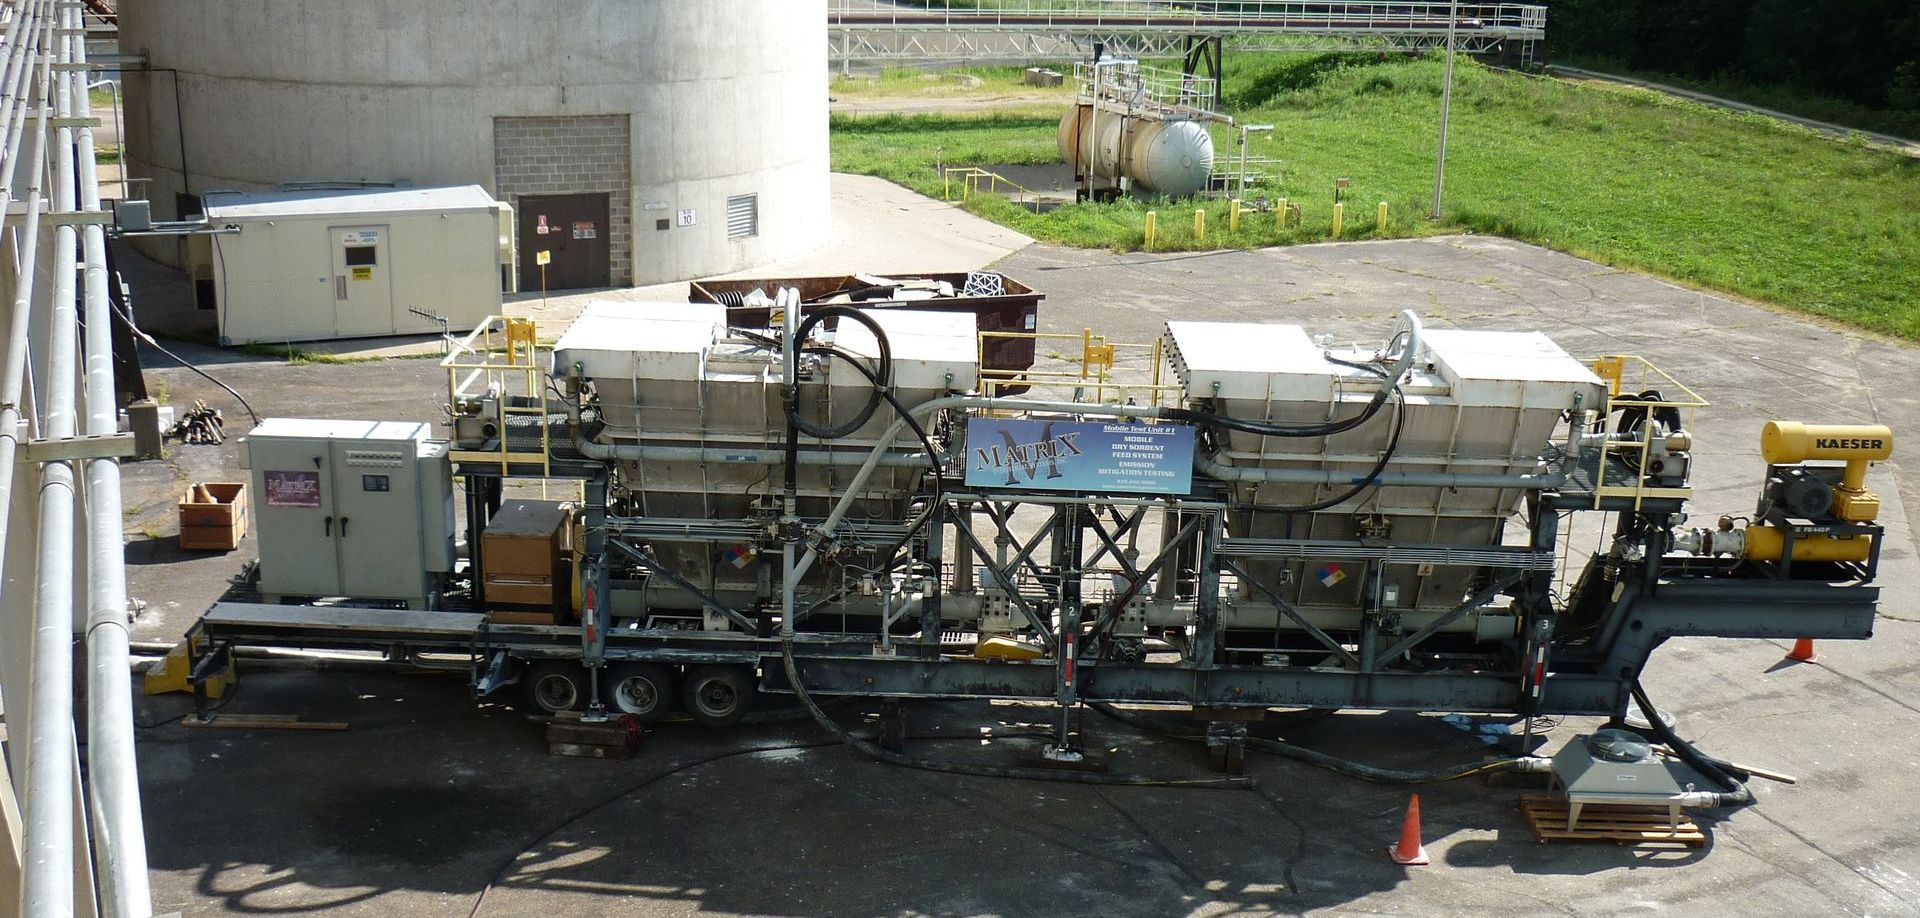 MOBILE TEST UNIT (MTU) - MOBILE FEED AND DELIVERY SYSTEM